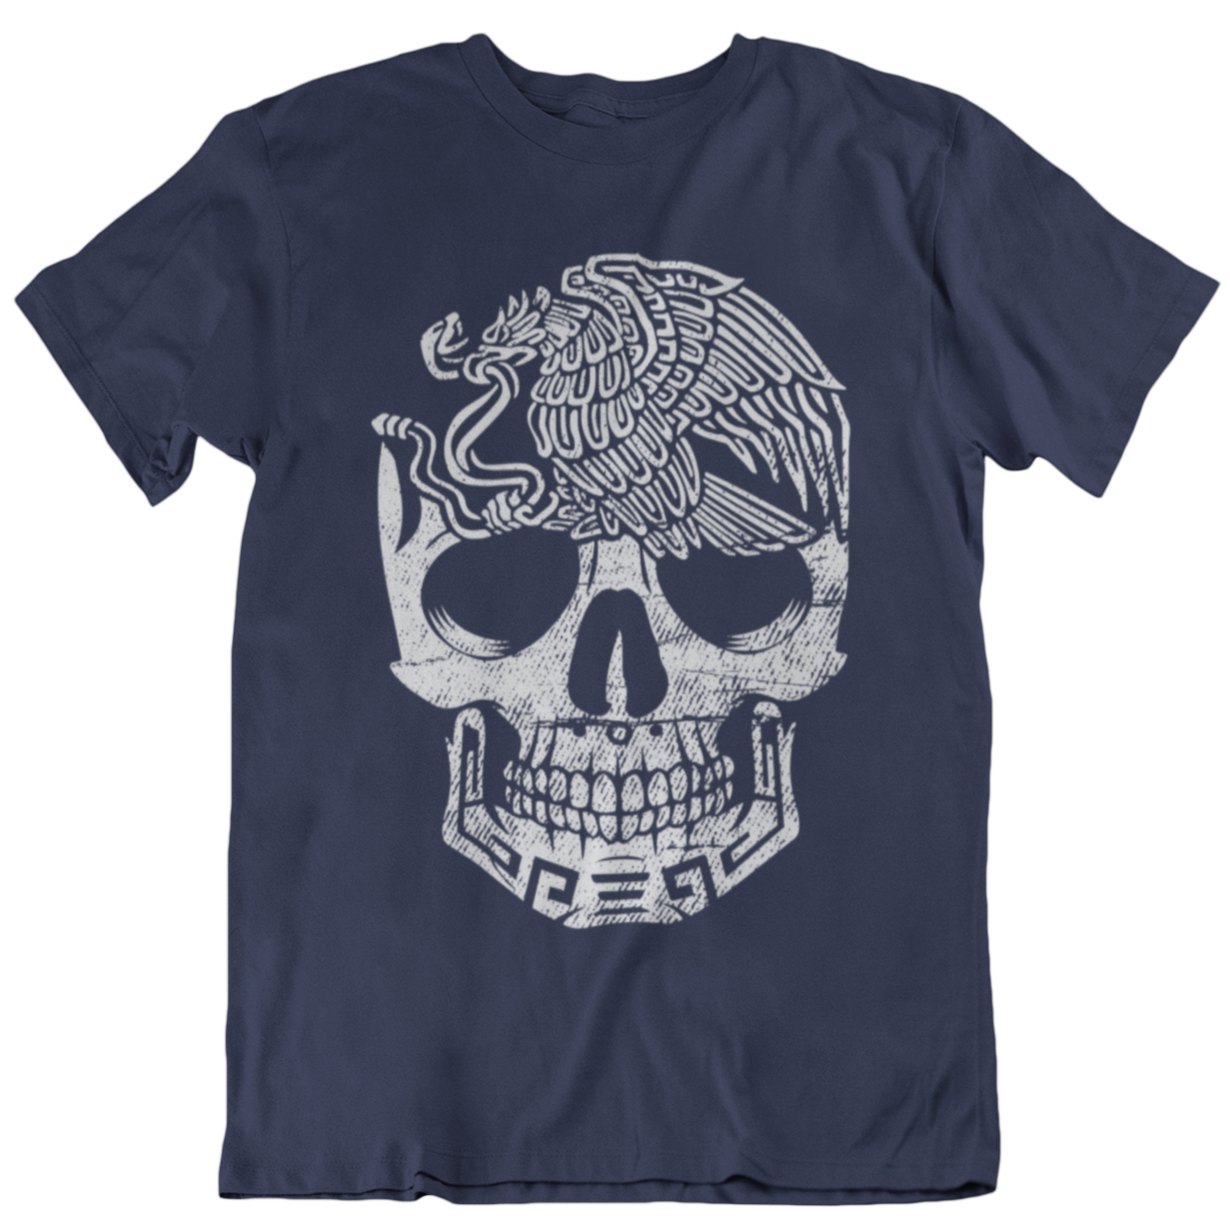 Mexican eagle inspired t-shirt for men, with a skull graphic in a graffiti style